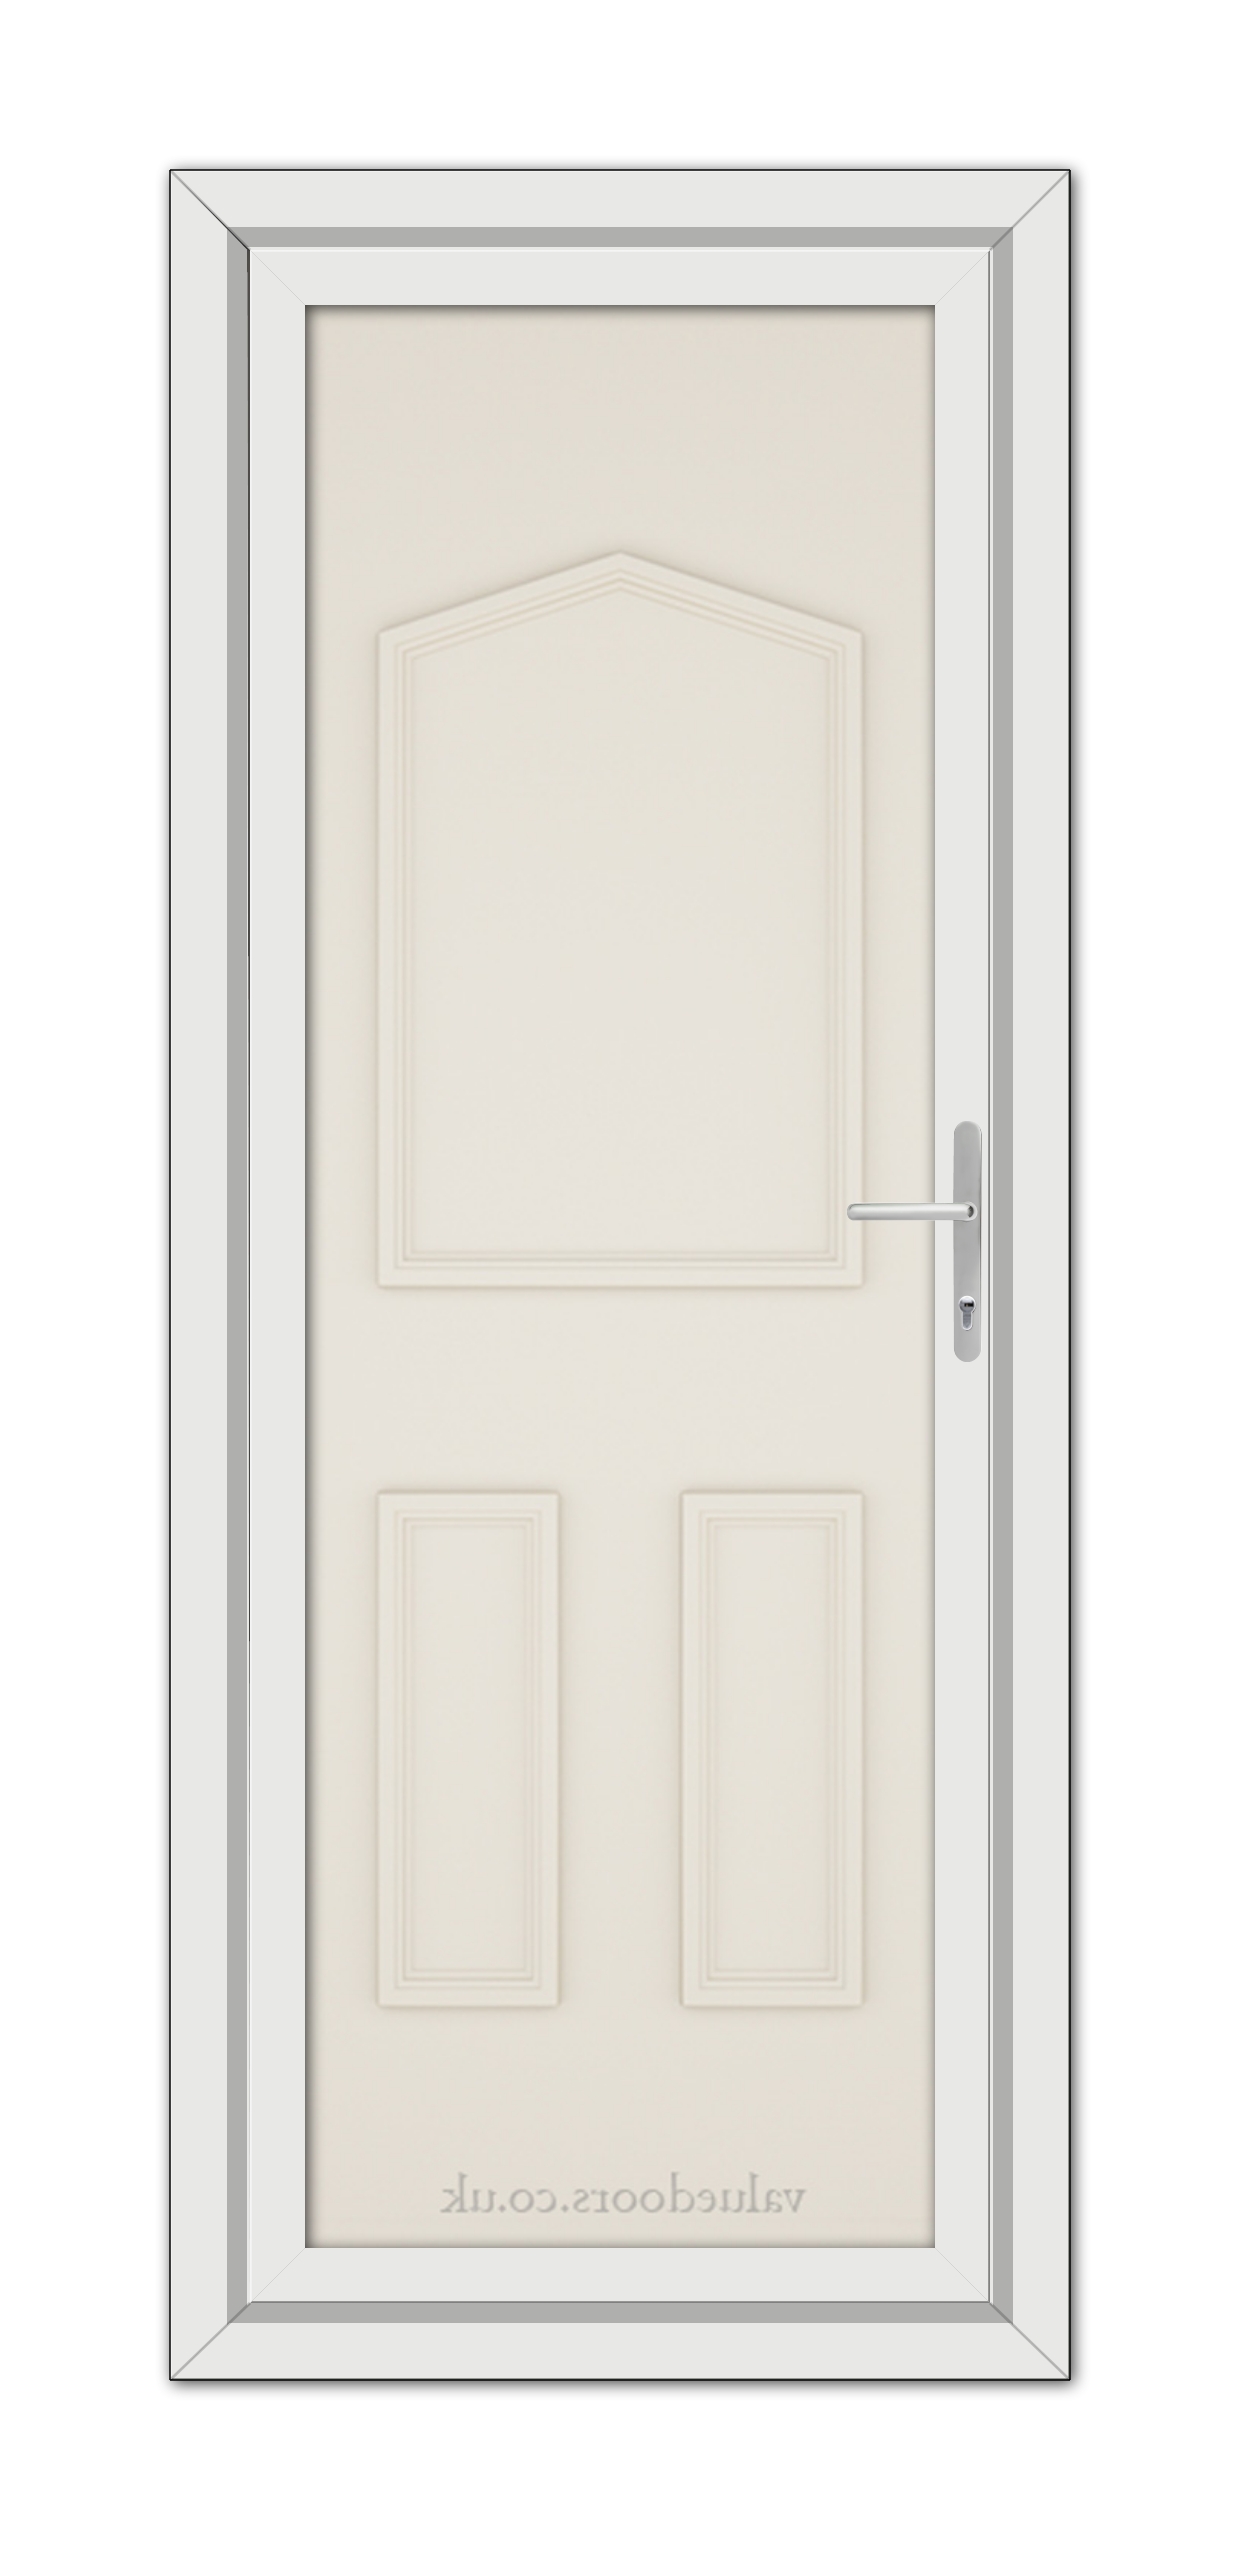 A vertical image of a closed, Cream Oxford Solid uPVC Door with a handle on the right side, set within a grey frame.